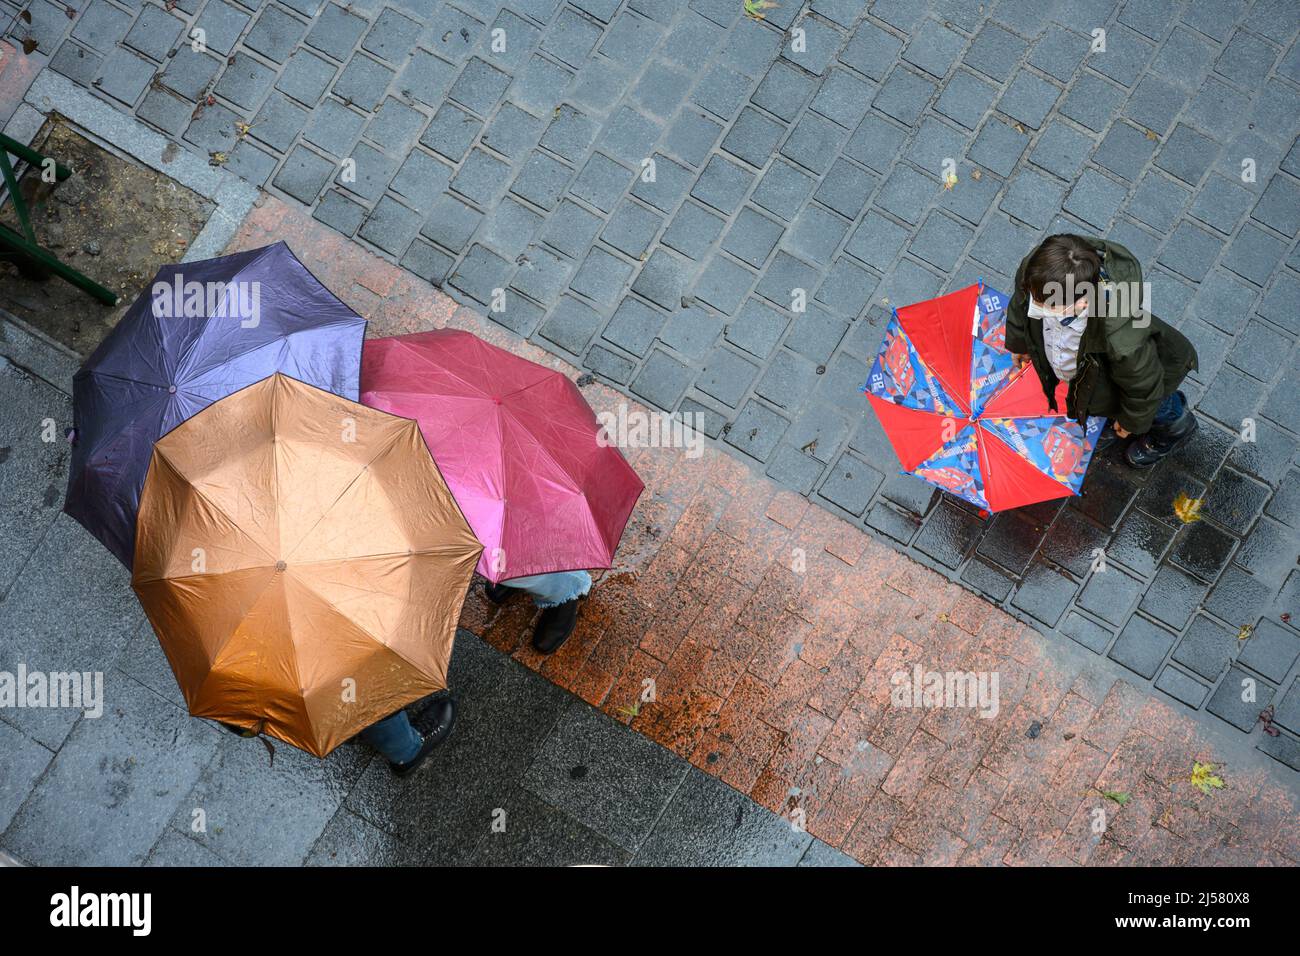 Groups of people talking  under umbrellas on a rainy day in Madrid, Spain. Stock Photo